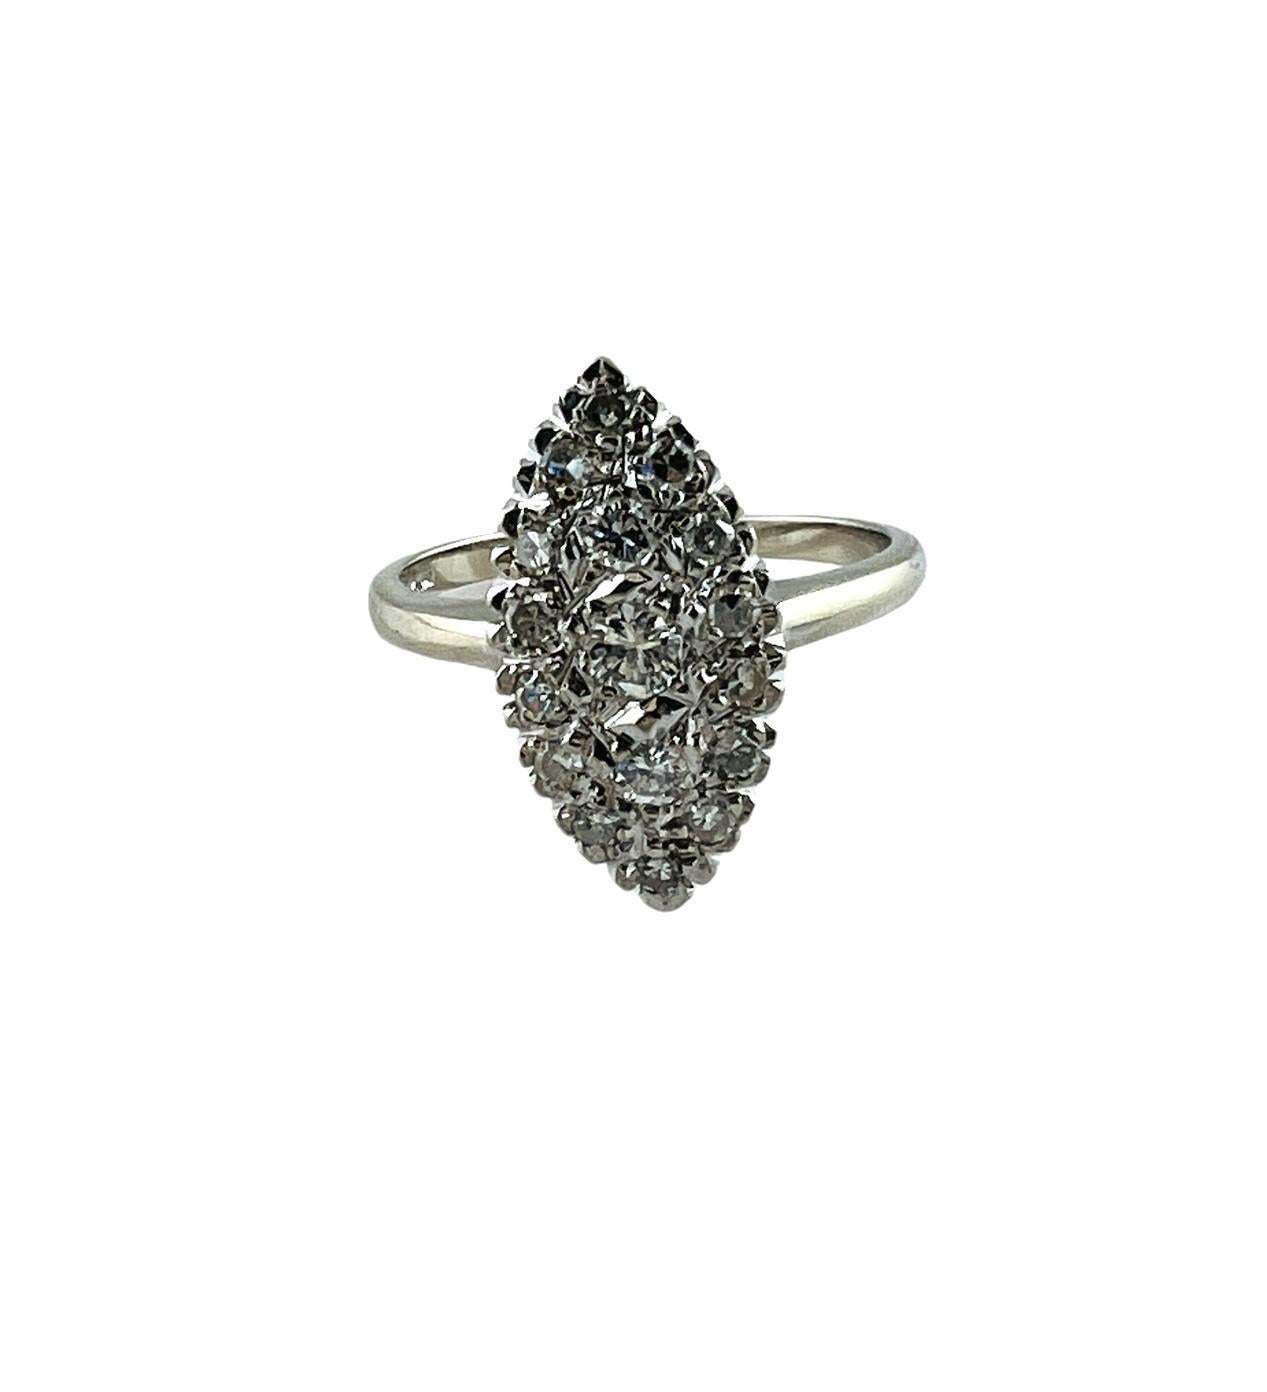 14K White Gold Diamond Cluster Ring

This beautiful sparkling ring is set with 3 center round brilliant diamonds totaling approx. 0.20 cts

14 single cut diamonds surround the center diamond totaling approximately 0.28 cts

0.48 cts in total diamond